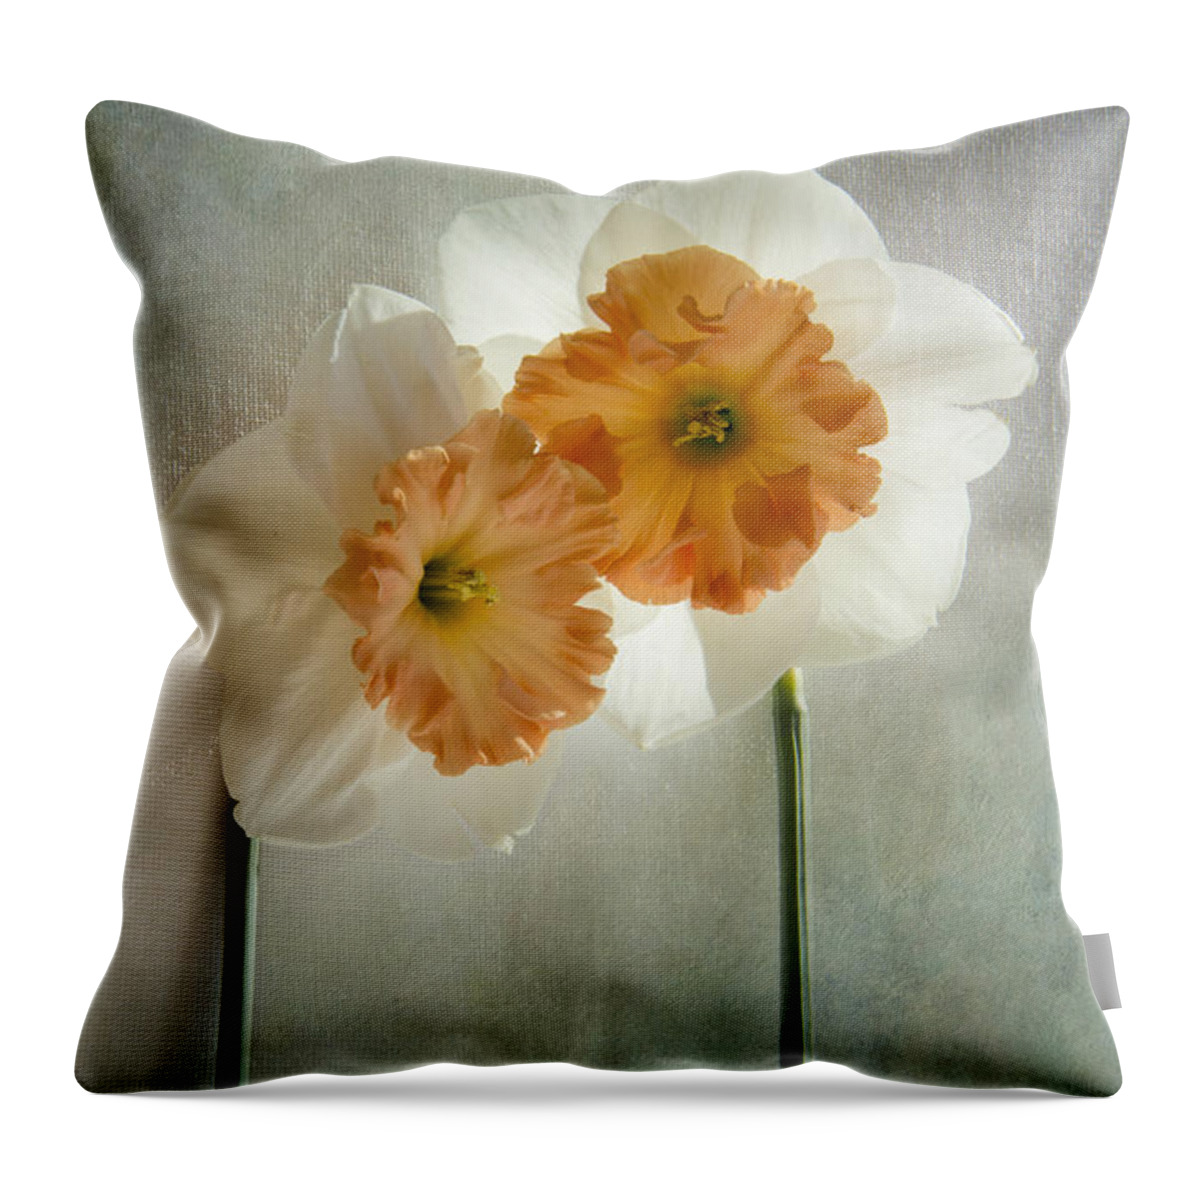 Daffodil Throw Pillow featuring the photograph Love In Bloom by Marina Kojukhova